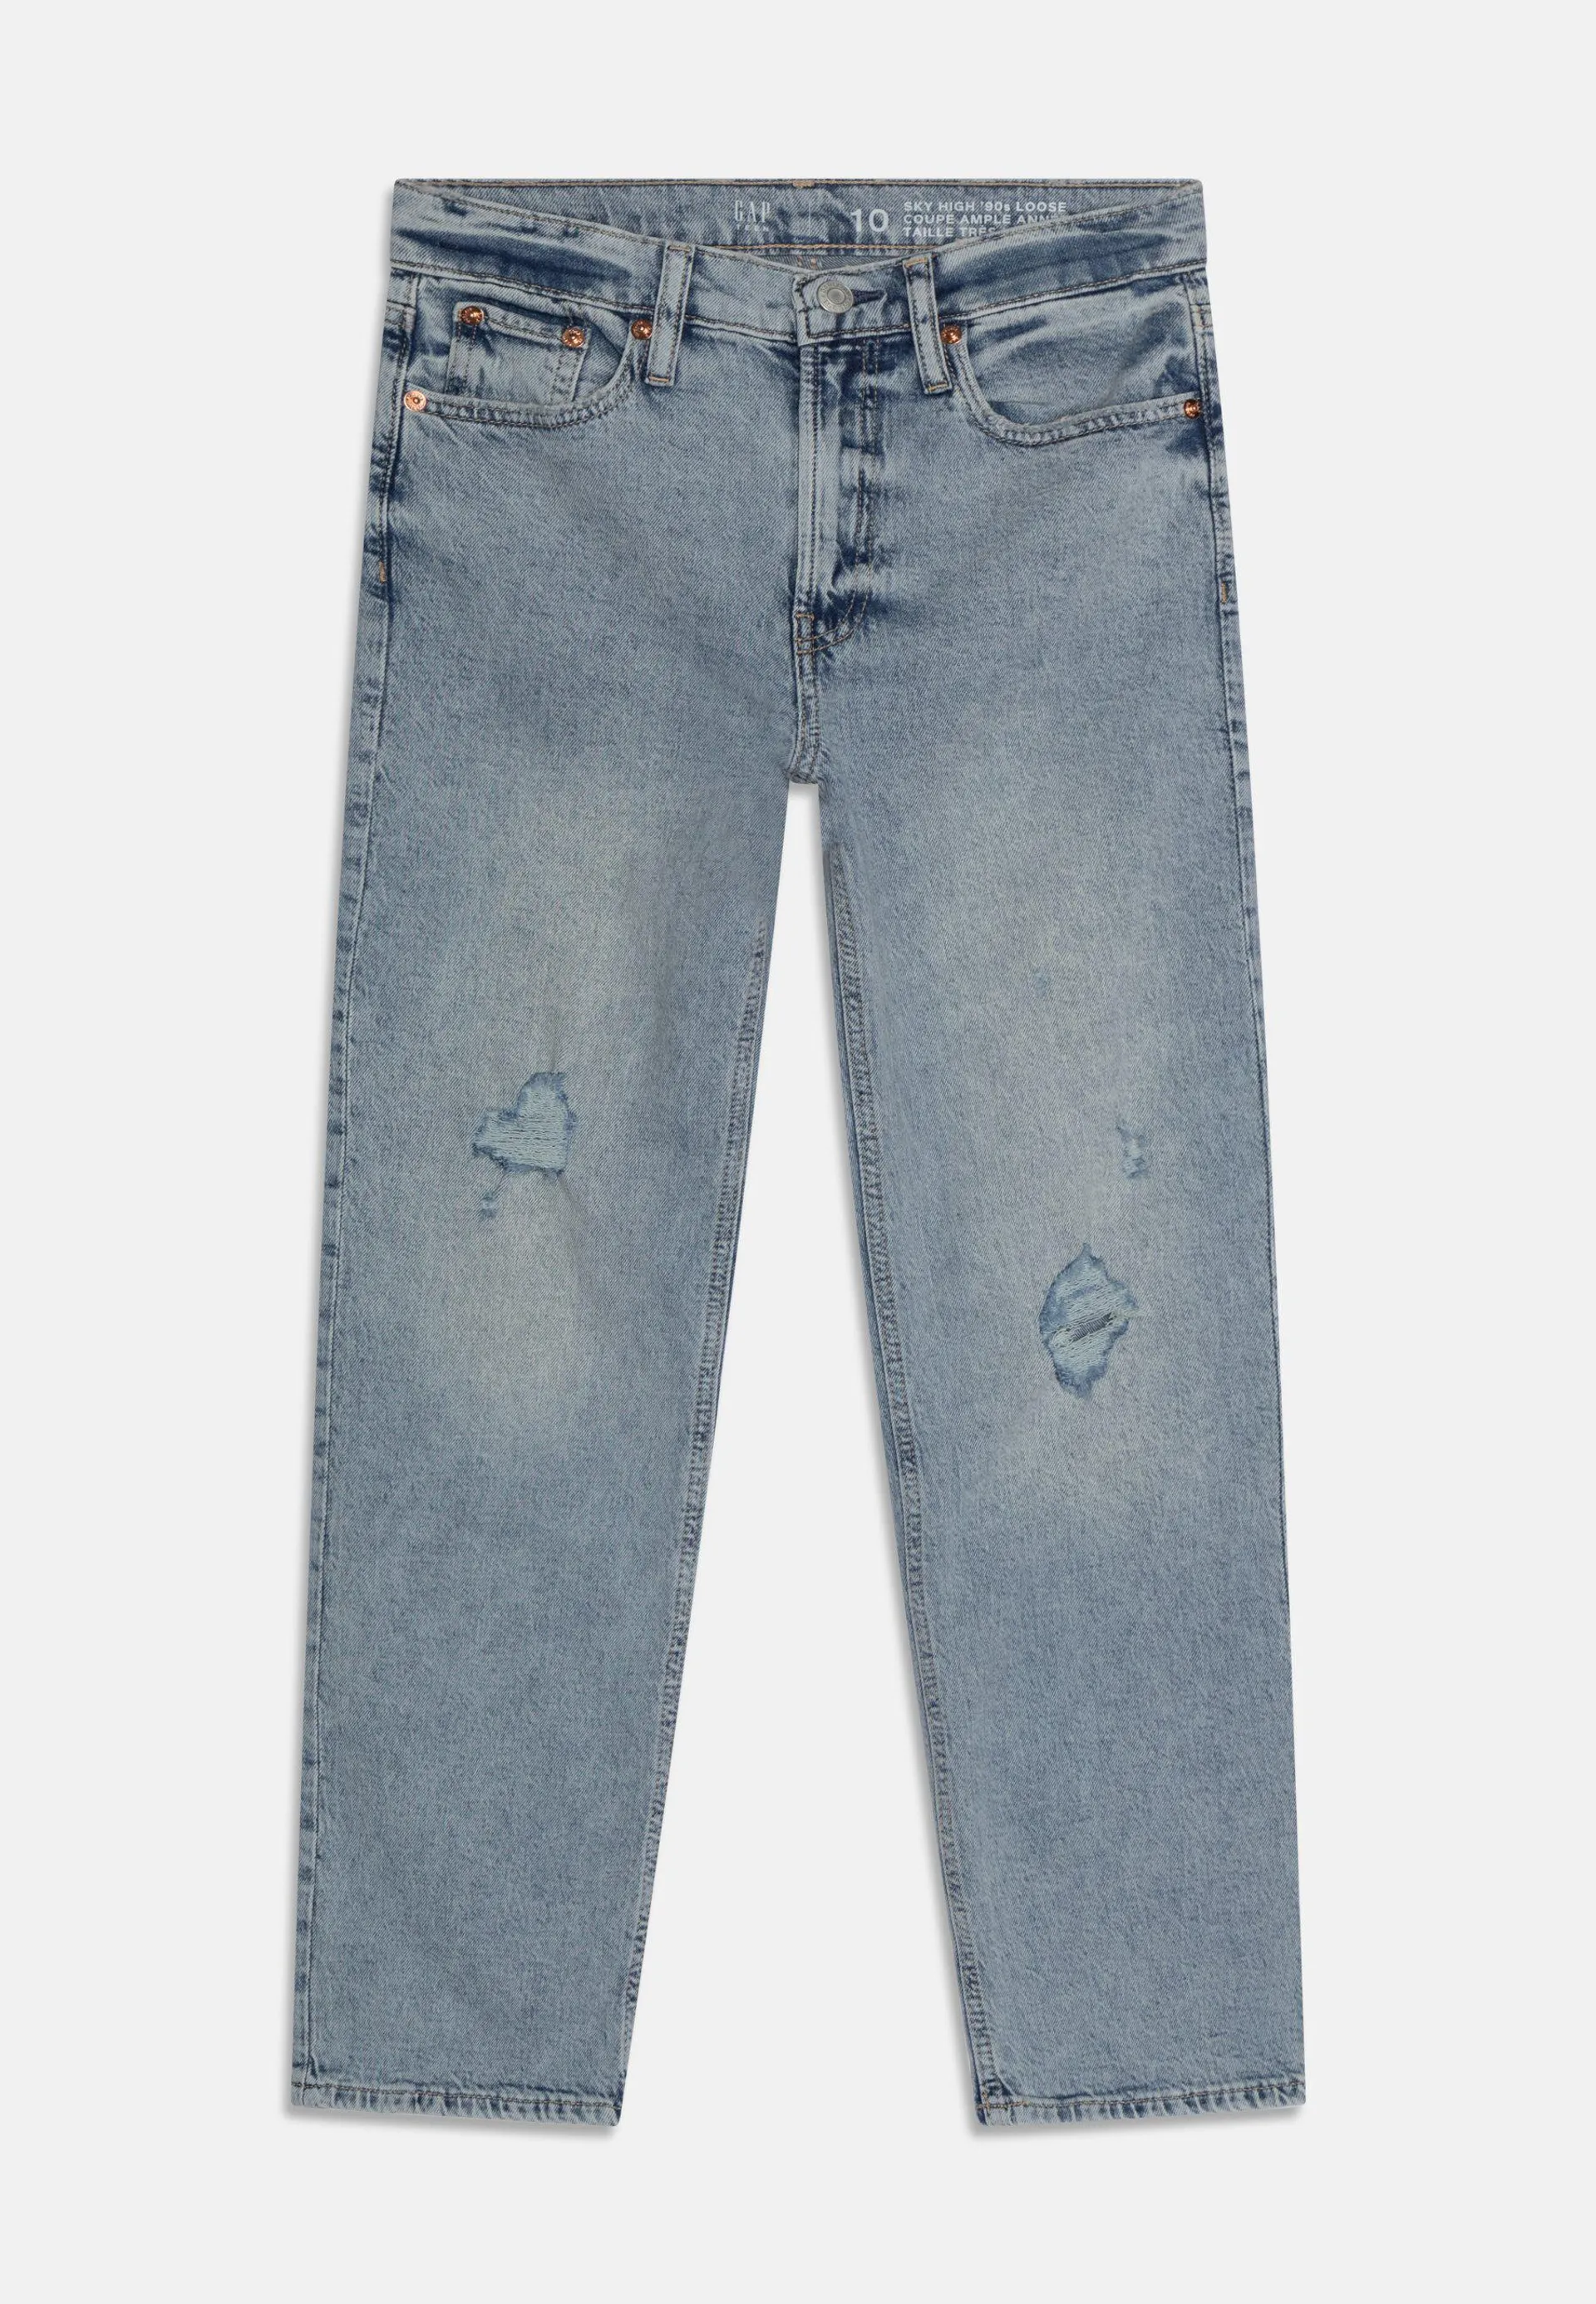 LOOSE SKY HIGH INDIGO GIRLS - Relaxed fit jeans